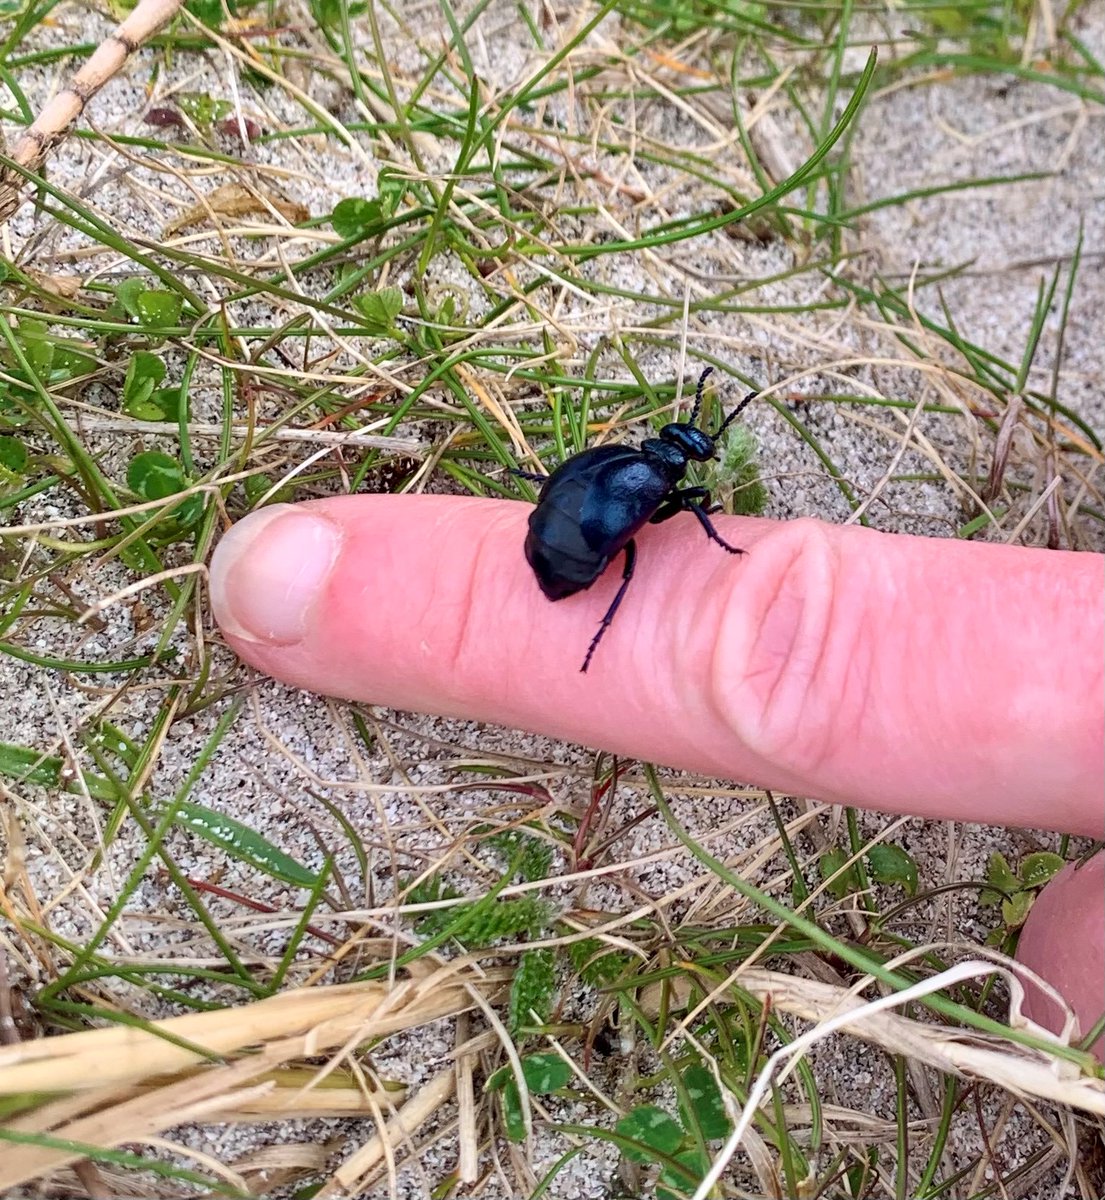 Thanks to Buglife's Scottish Oil Beetle Hunt & surveying conducted through Species on the Edge, Scottish records of oil beetles on @iRecordWildlife more than doubled last year! Let's keep it up! Join the Scottish #OilBeetleHunt in 2024! buglife.org.uk/news/buglife-l… @Buzz_dont_tweet